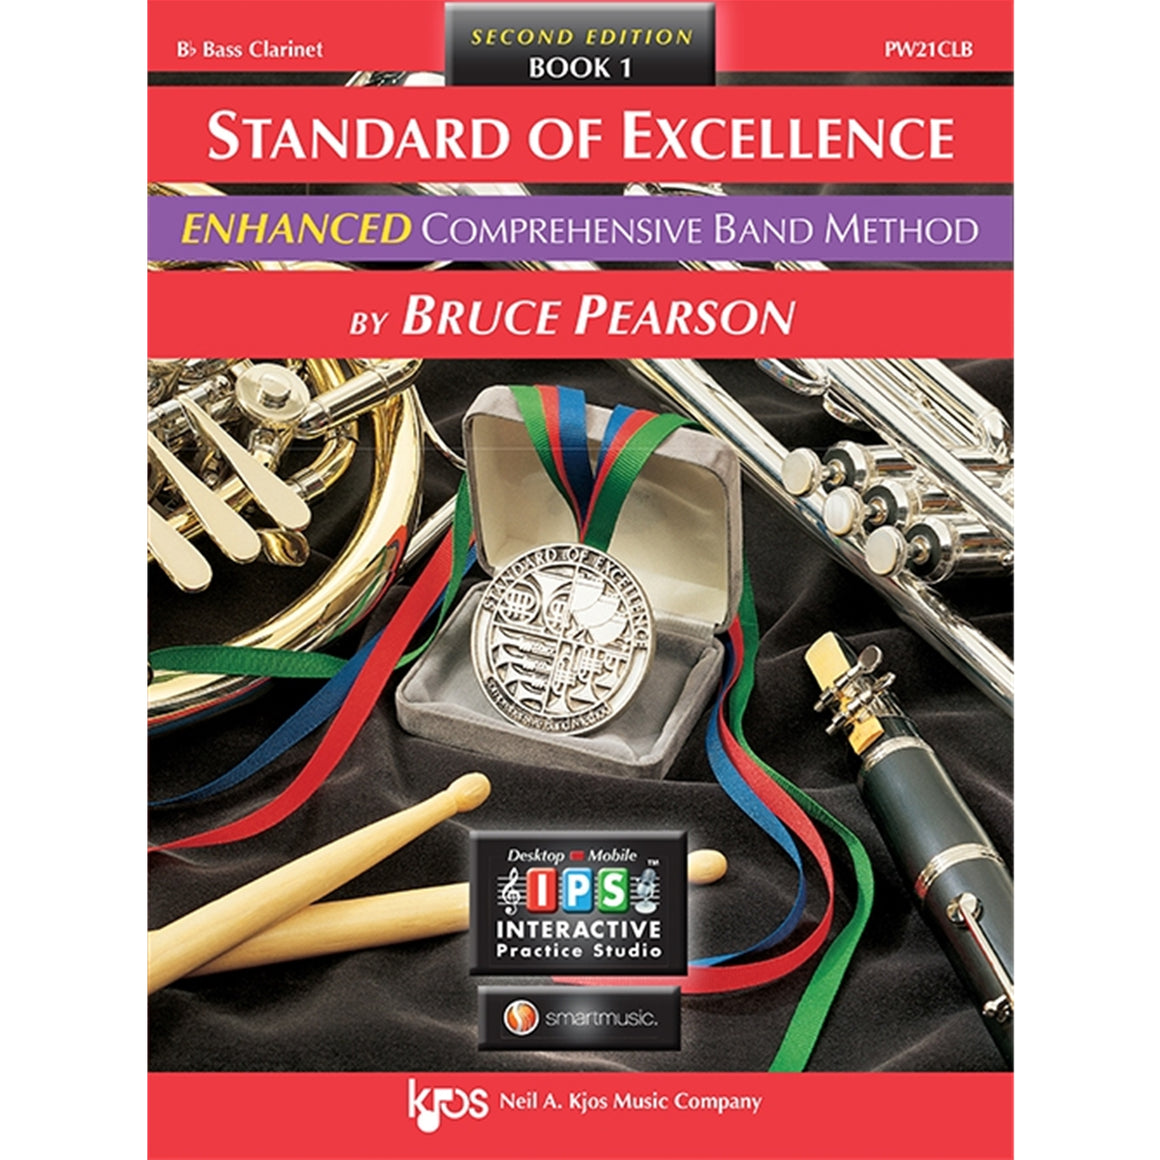 KJOS PW21CLB Standard of Excellence Book 1 Bass Clarinet